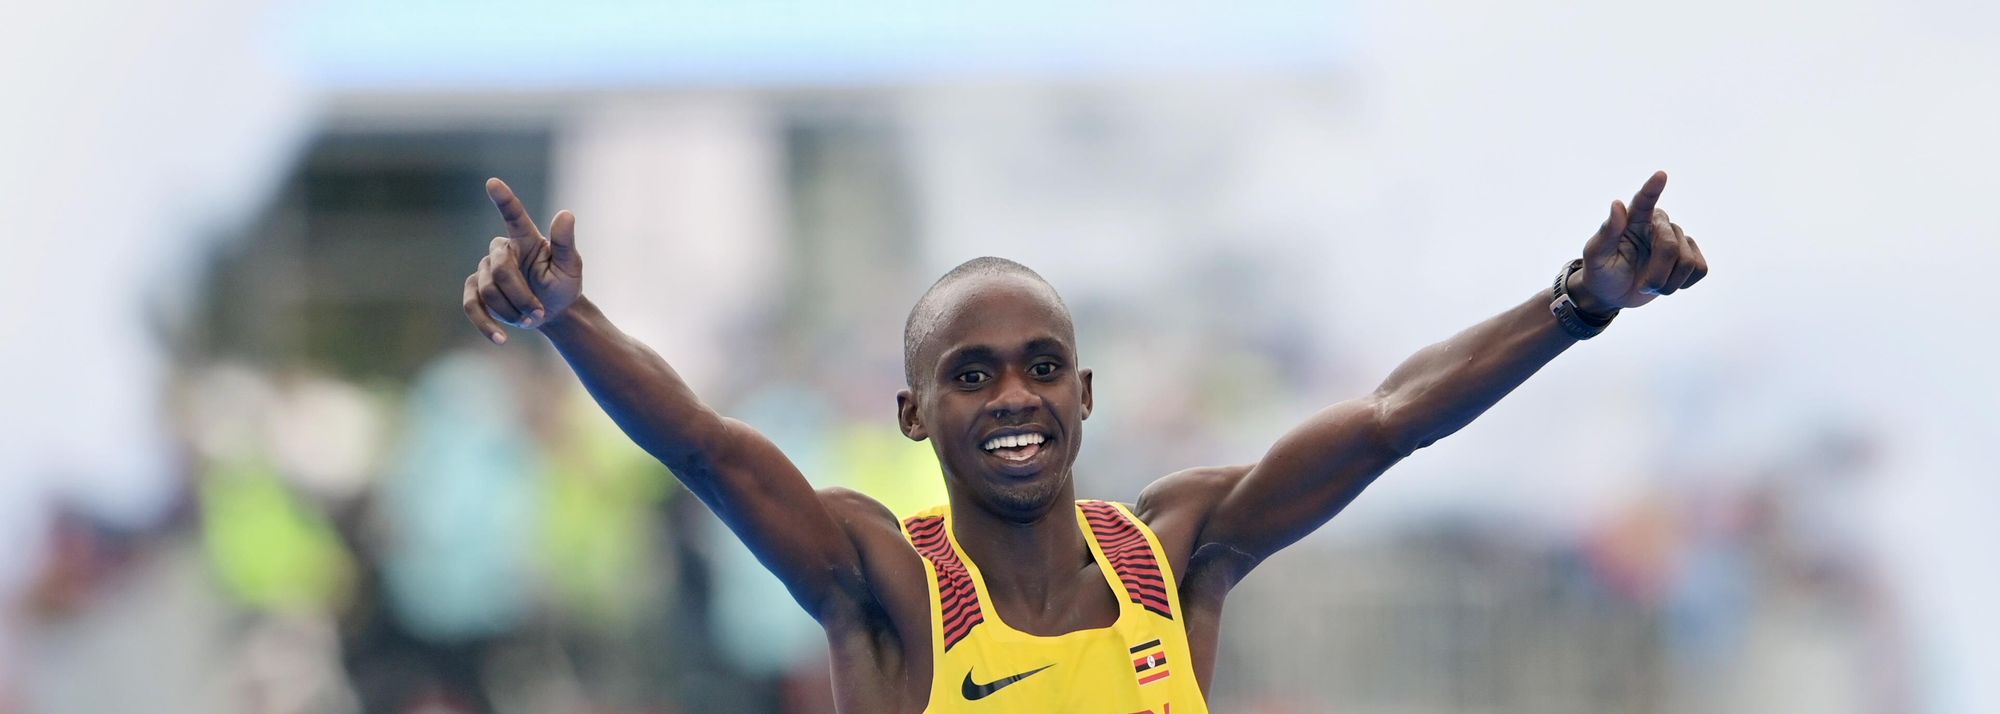 For the first time in the 28-year history of this event, a Ugandan athlete stood proud atop the podium, but it wasn’t the one most expected. In the men’s race at the World Athletics Half Marathon Championships Gdynia 2020 on Saturday (17), it was Jacob Kiplimo and not Joshua Cheptegei who reigned supreme, the 19-year-old coming of age with his first global title at senior level.